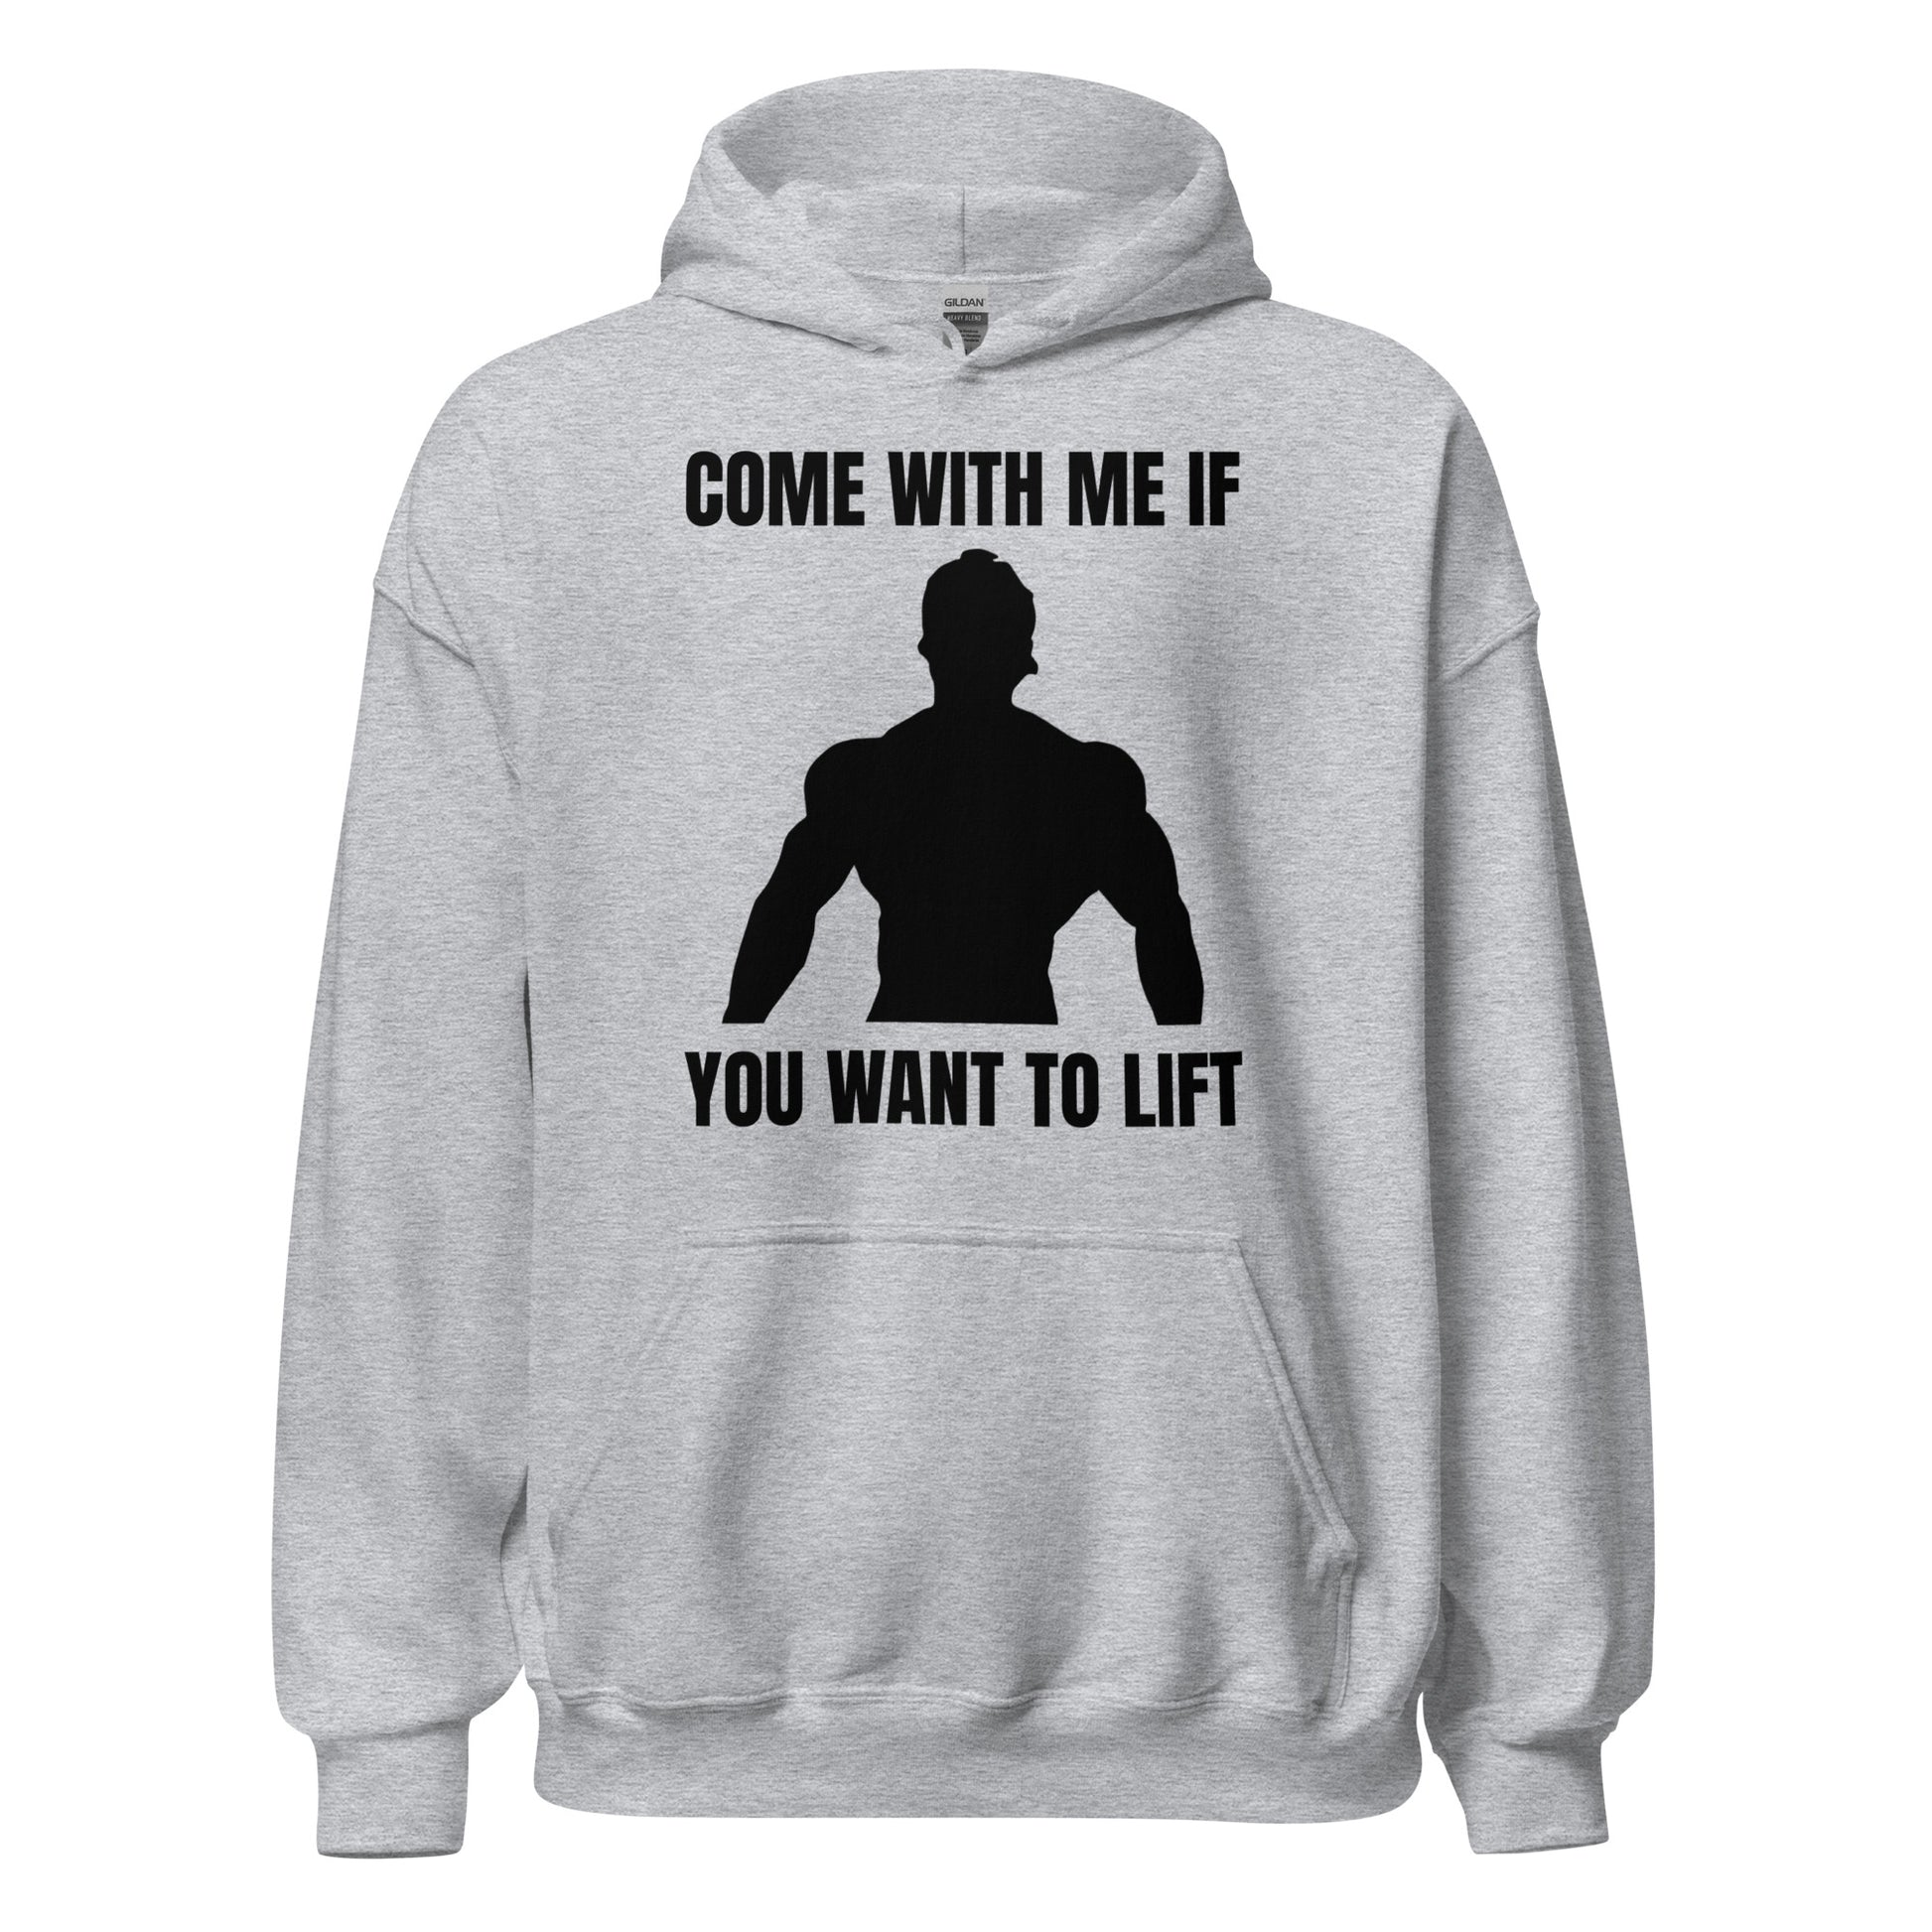 Come with Me if You Want to Lift Hoodie in Sport Grey